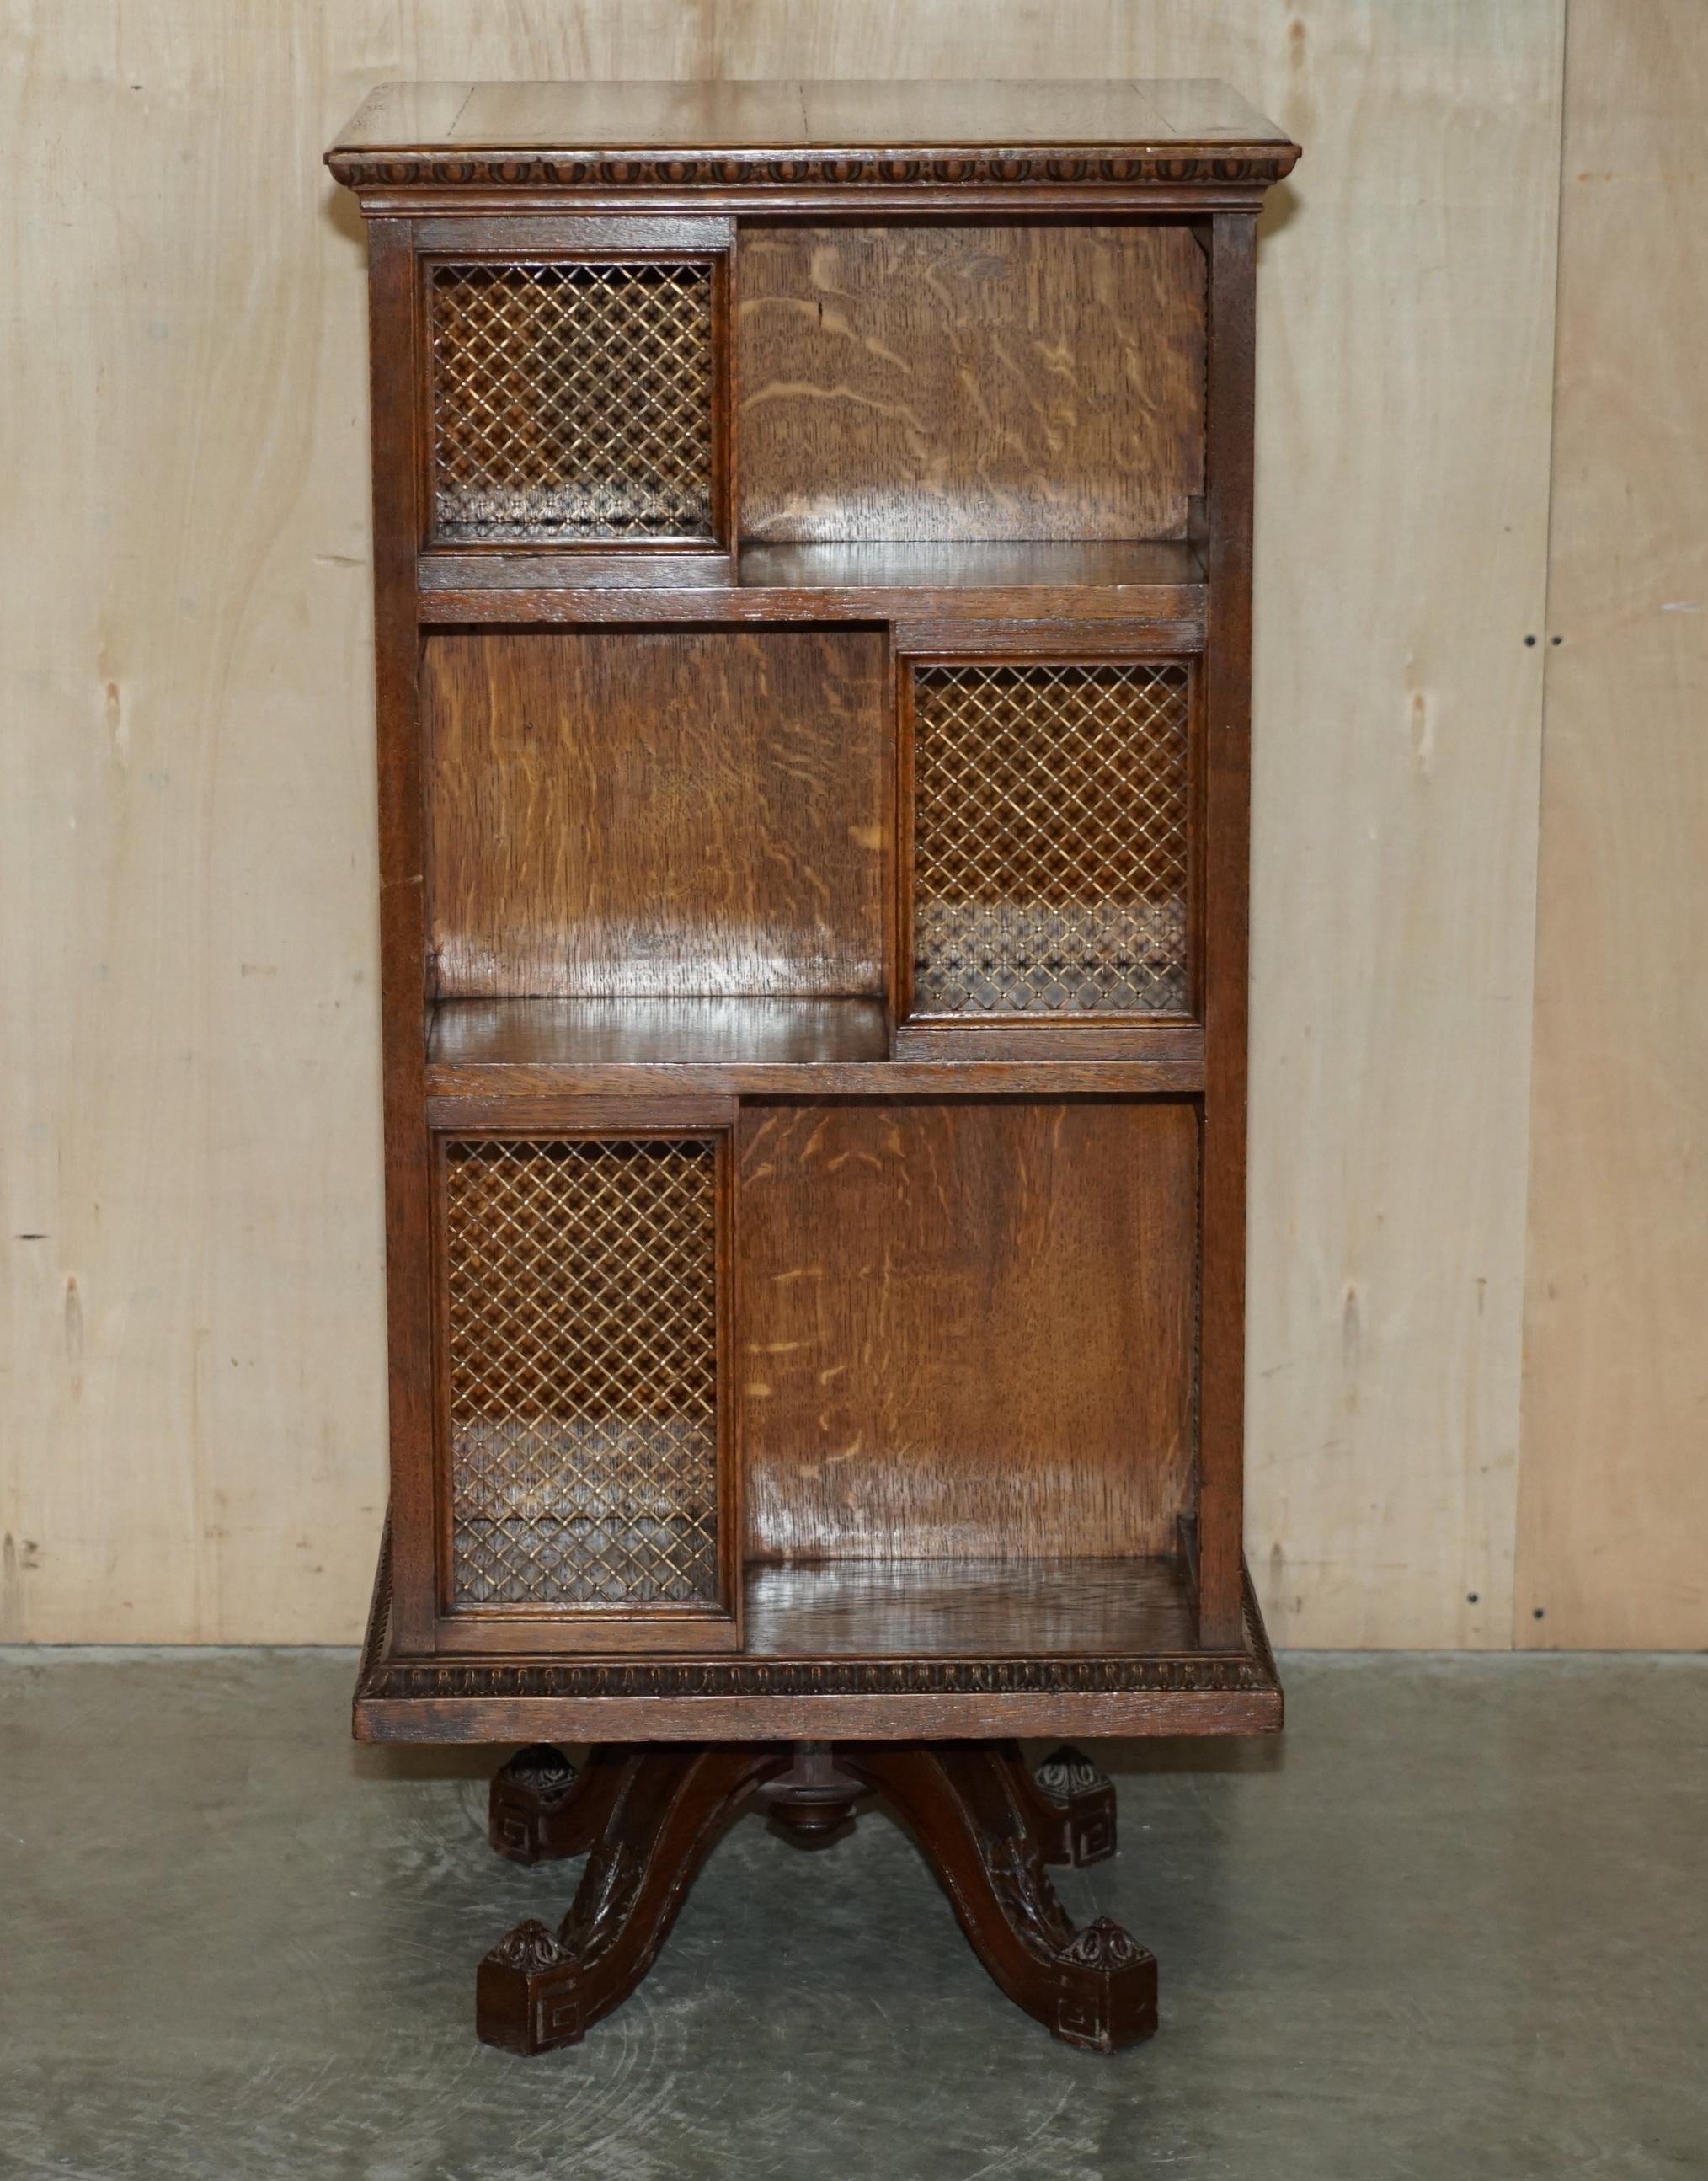 We are delighted to offer for sale this very well made English oak circa 1880-1900 fully restored revolving bookcase table with brass fret work panels and ornately carved legs 

A good looking and well made piece, you can fit an entire at home